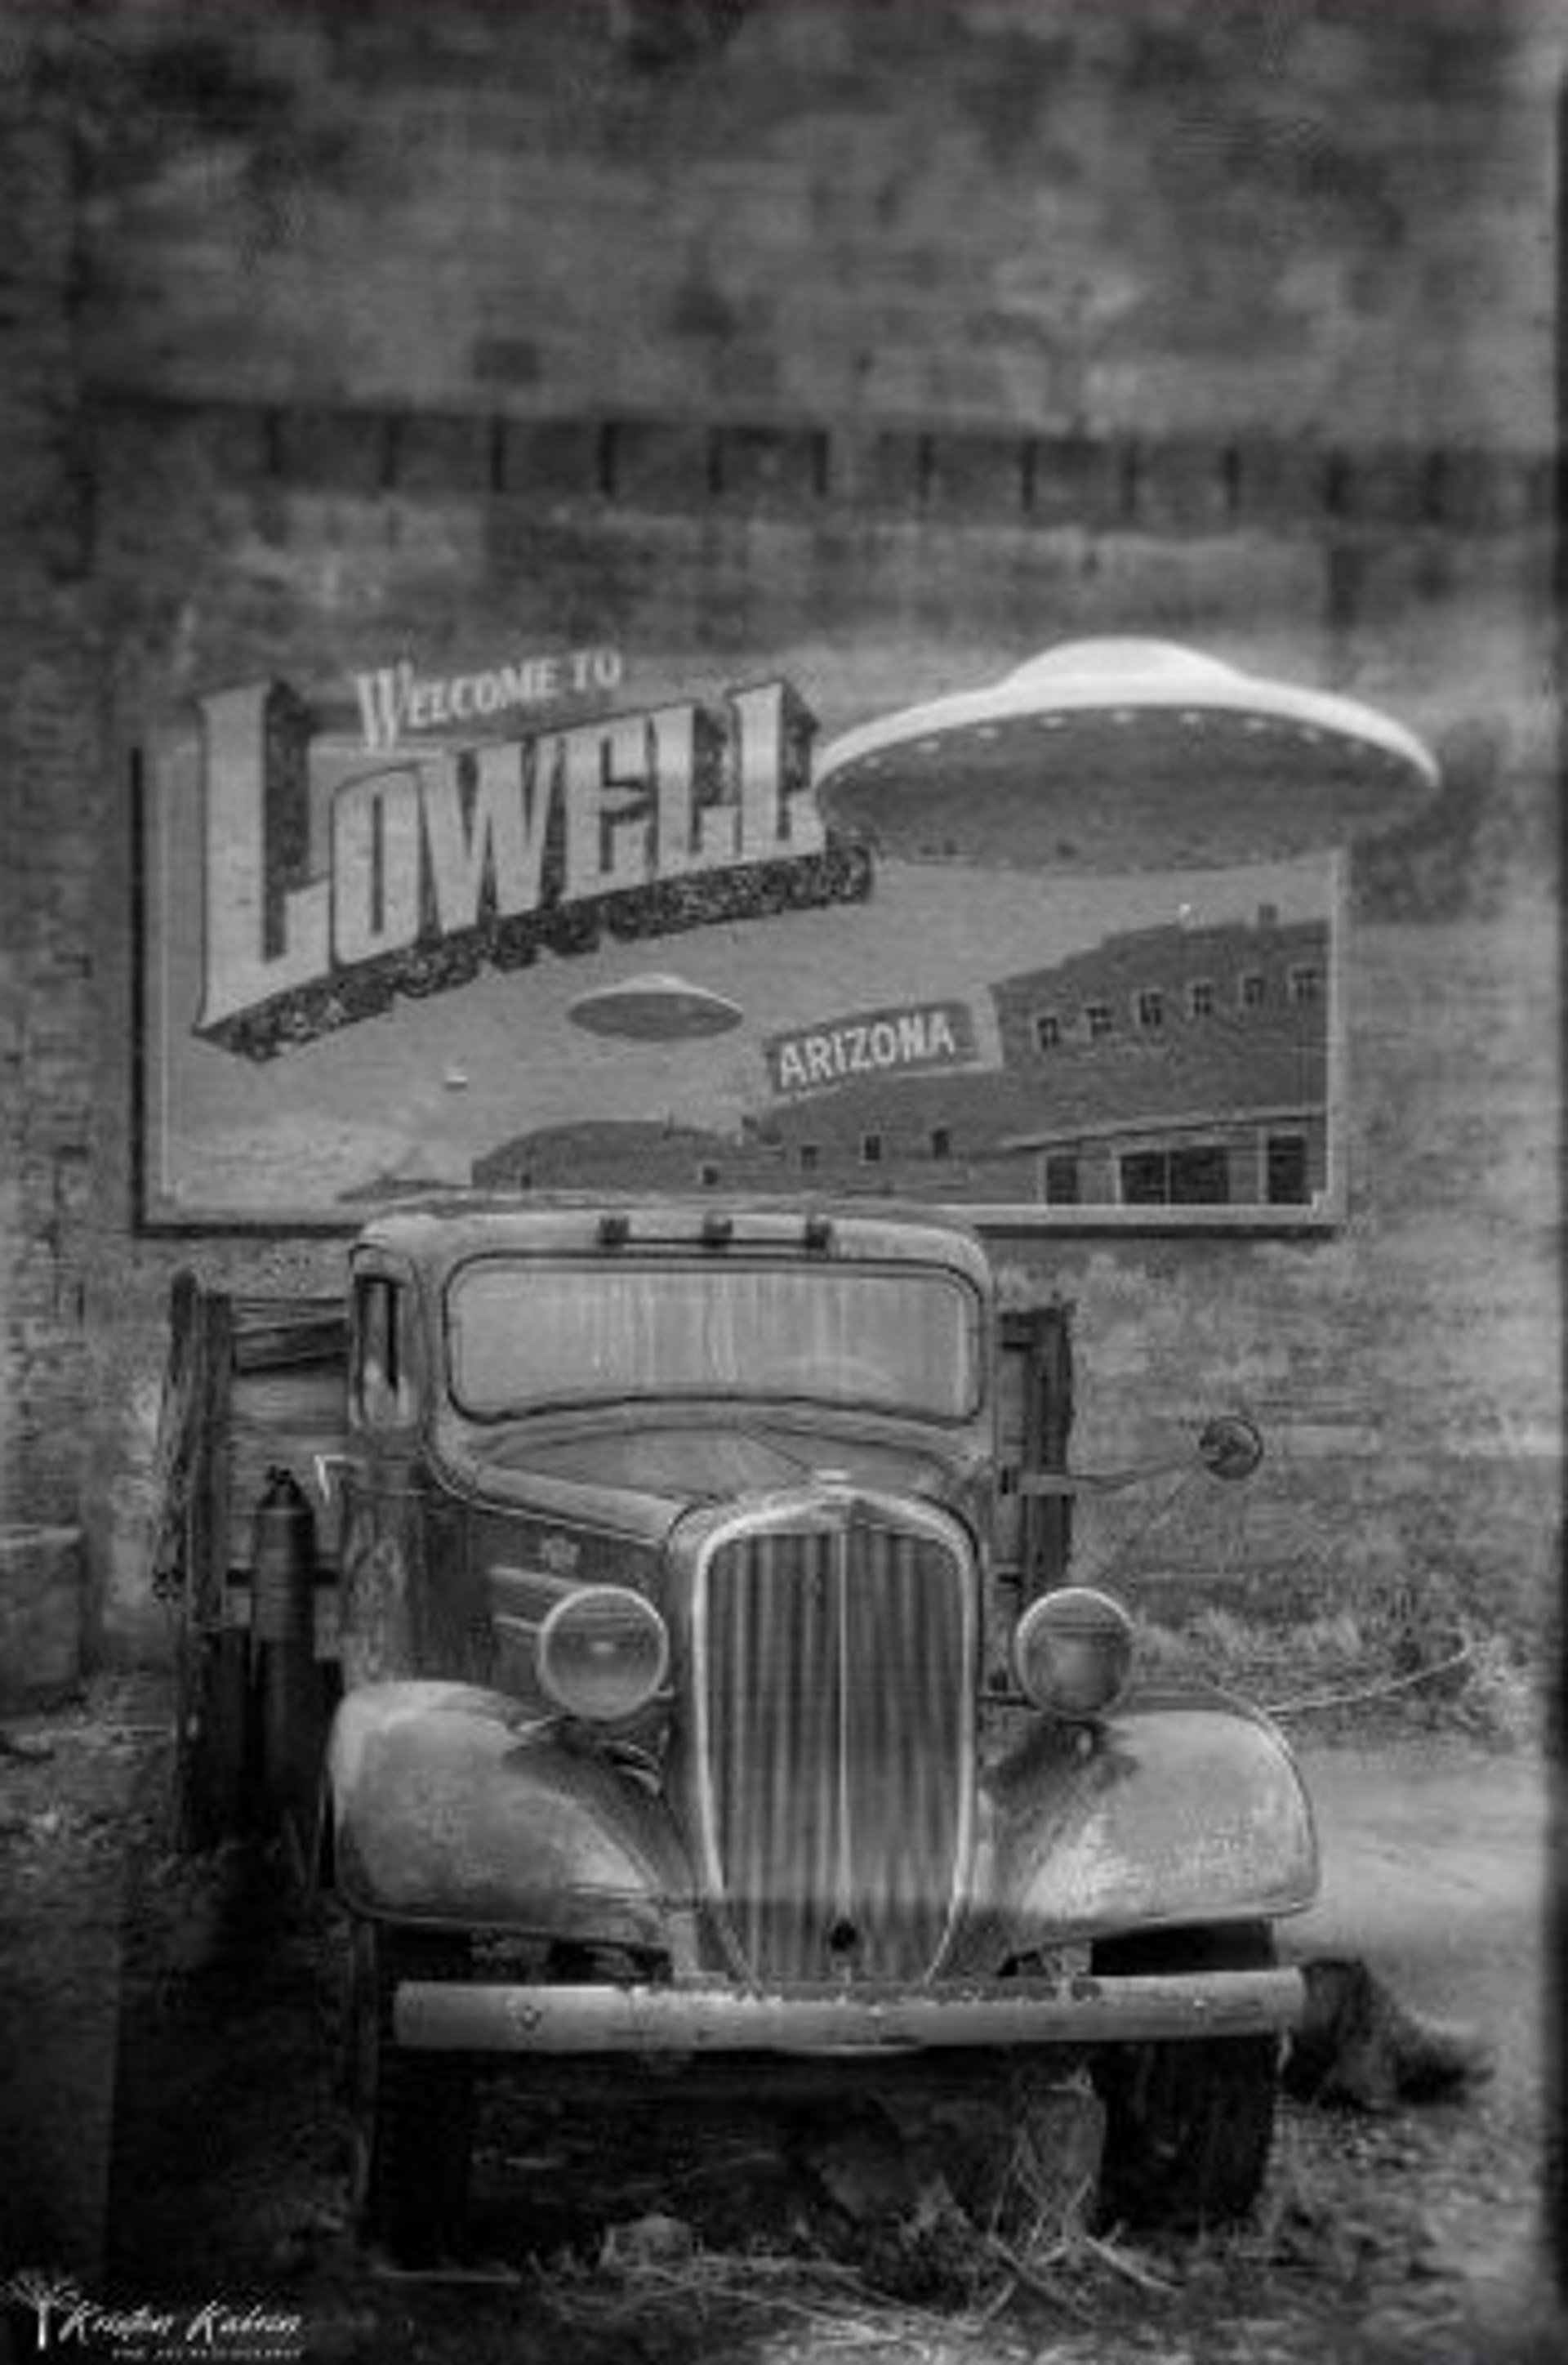 Pick Me Up in Lowell by Kristen Kabrin